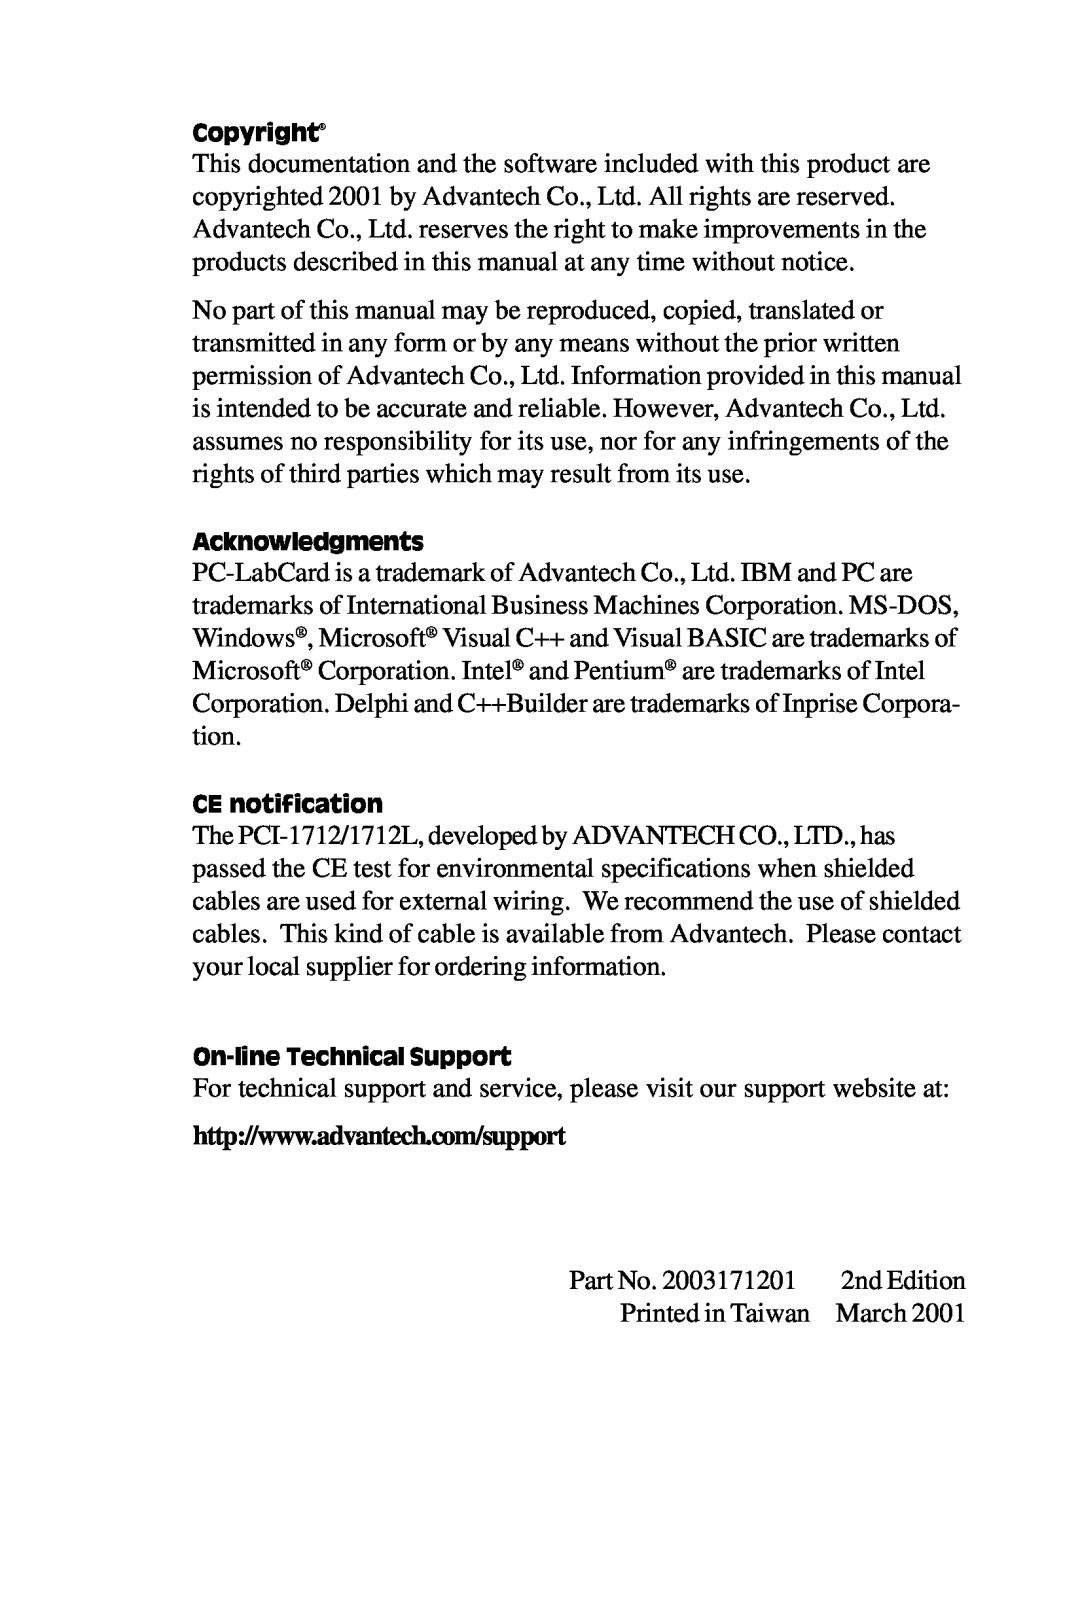 Konica Minolta PCI-1712L user manual 2nd Edition, Printed in Taiwan, March, Copyright, Acknowledgments, CE notification 